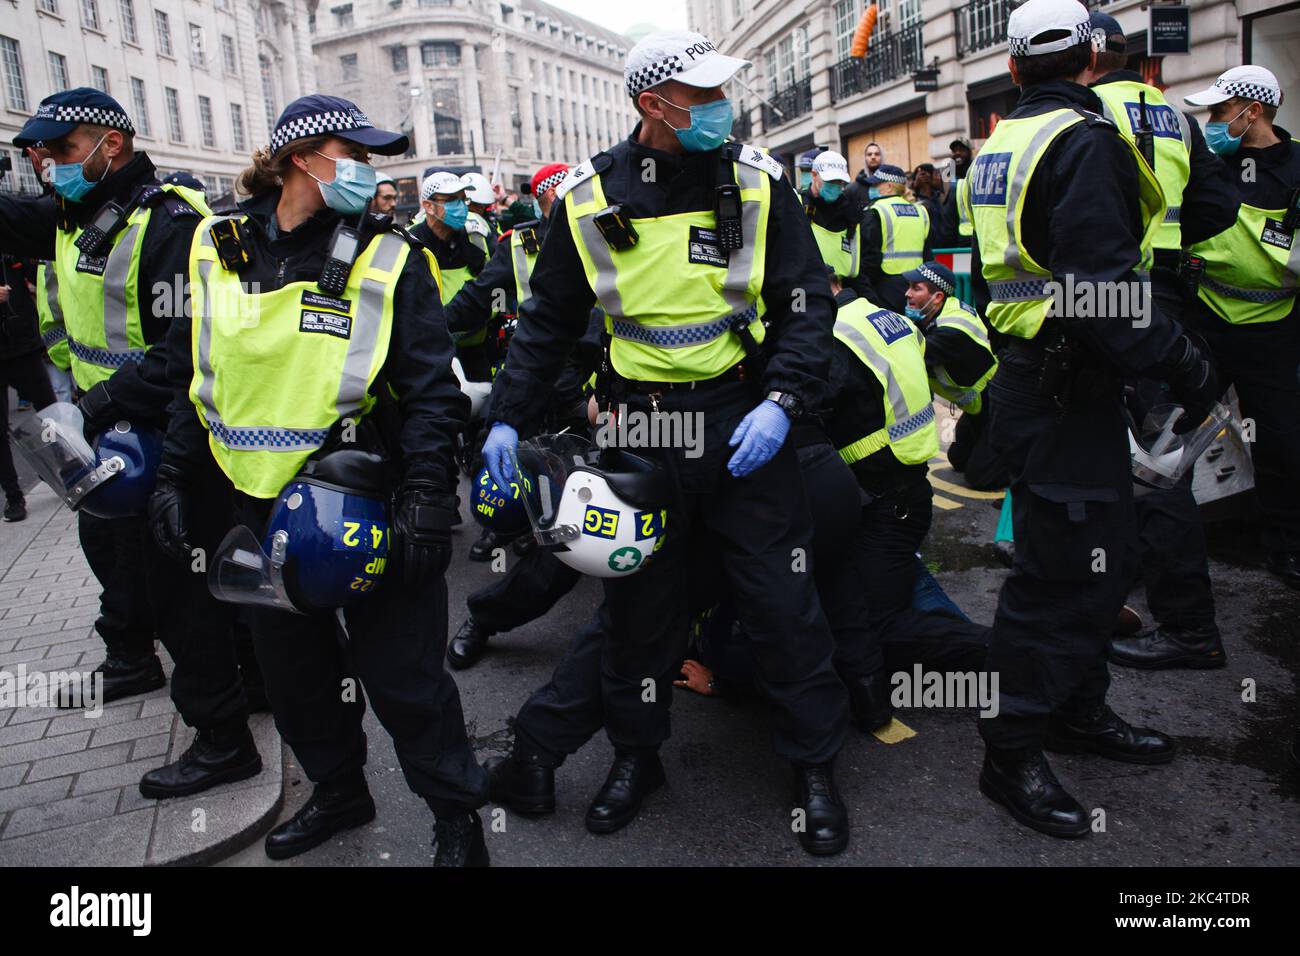 Anti-lockdown activists scuffle with police officers on Regent Street during a demonstration in London, England, on November 28, 2020. In an evening update the Metropolitan Police announced it had made 155 arrests over the course of the day's demonstrations, for offences including breaches of coronavirus regulations, assault on police and possession of drugs. London is to return to 'Tier 2' or 'high alert' covid-19 restrictions once the current England-wide coronavirus lockdown ends next Wednesday. All three of the tiers, assigned to local authorities across England, have been strengthened sin Stock Photo